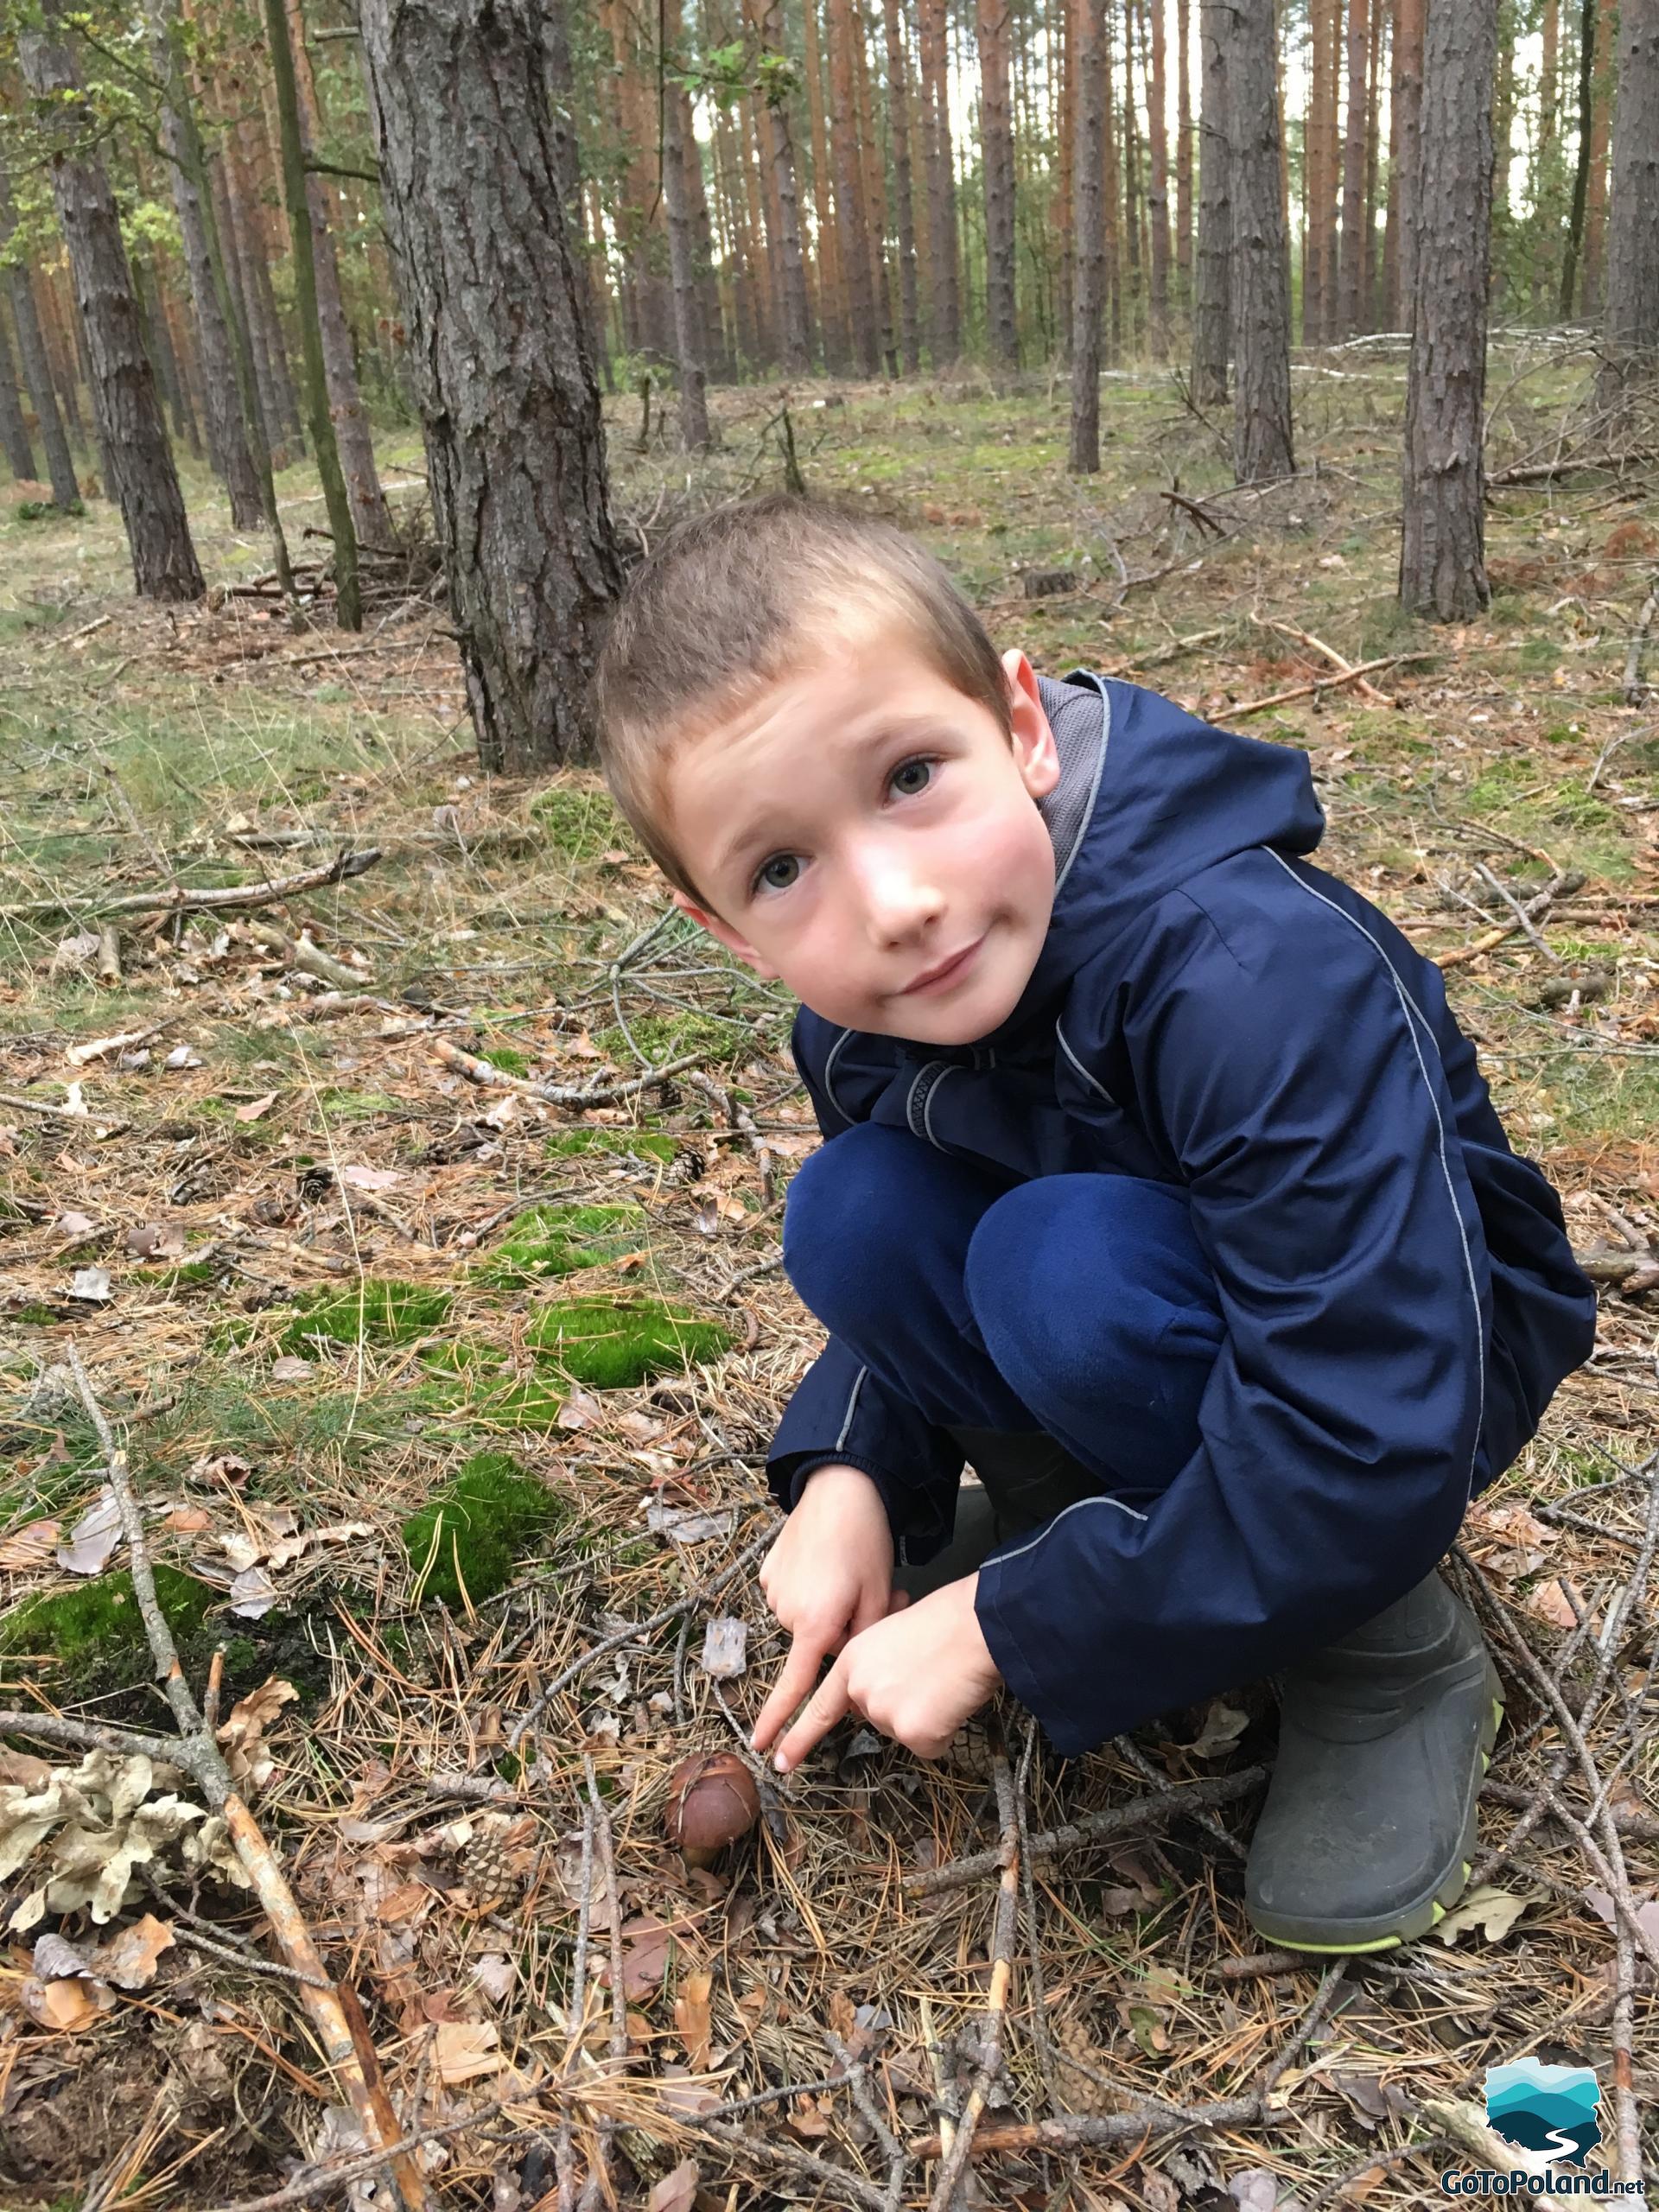 A young boy pointing a mushroom in a forest